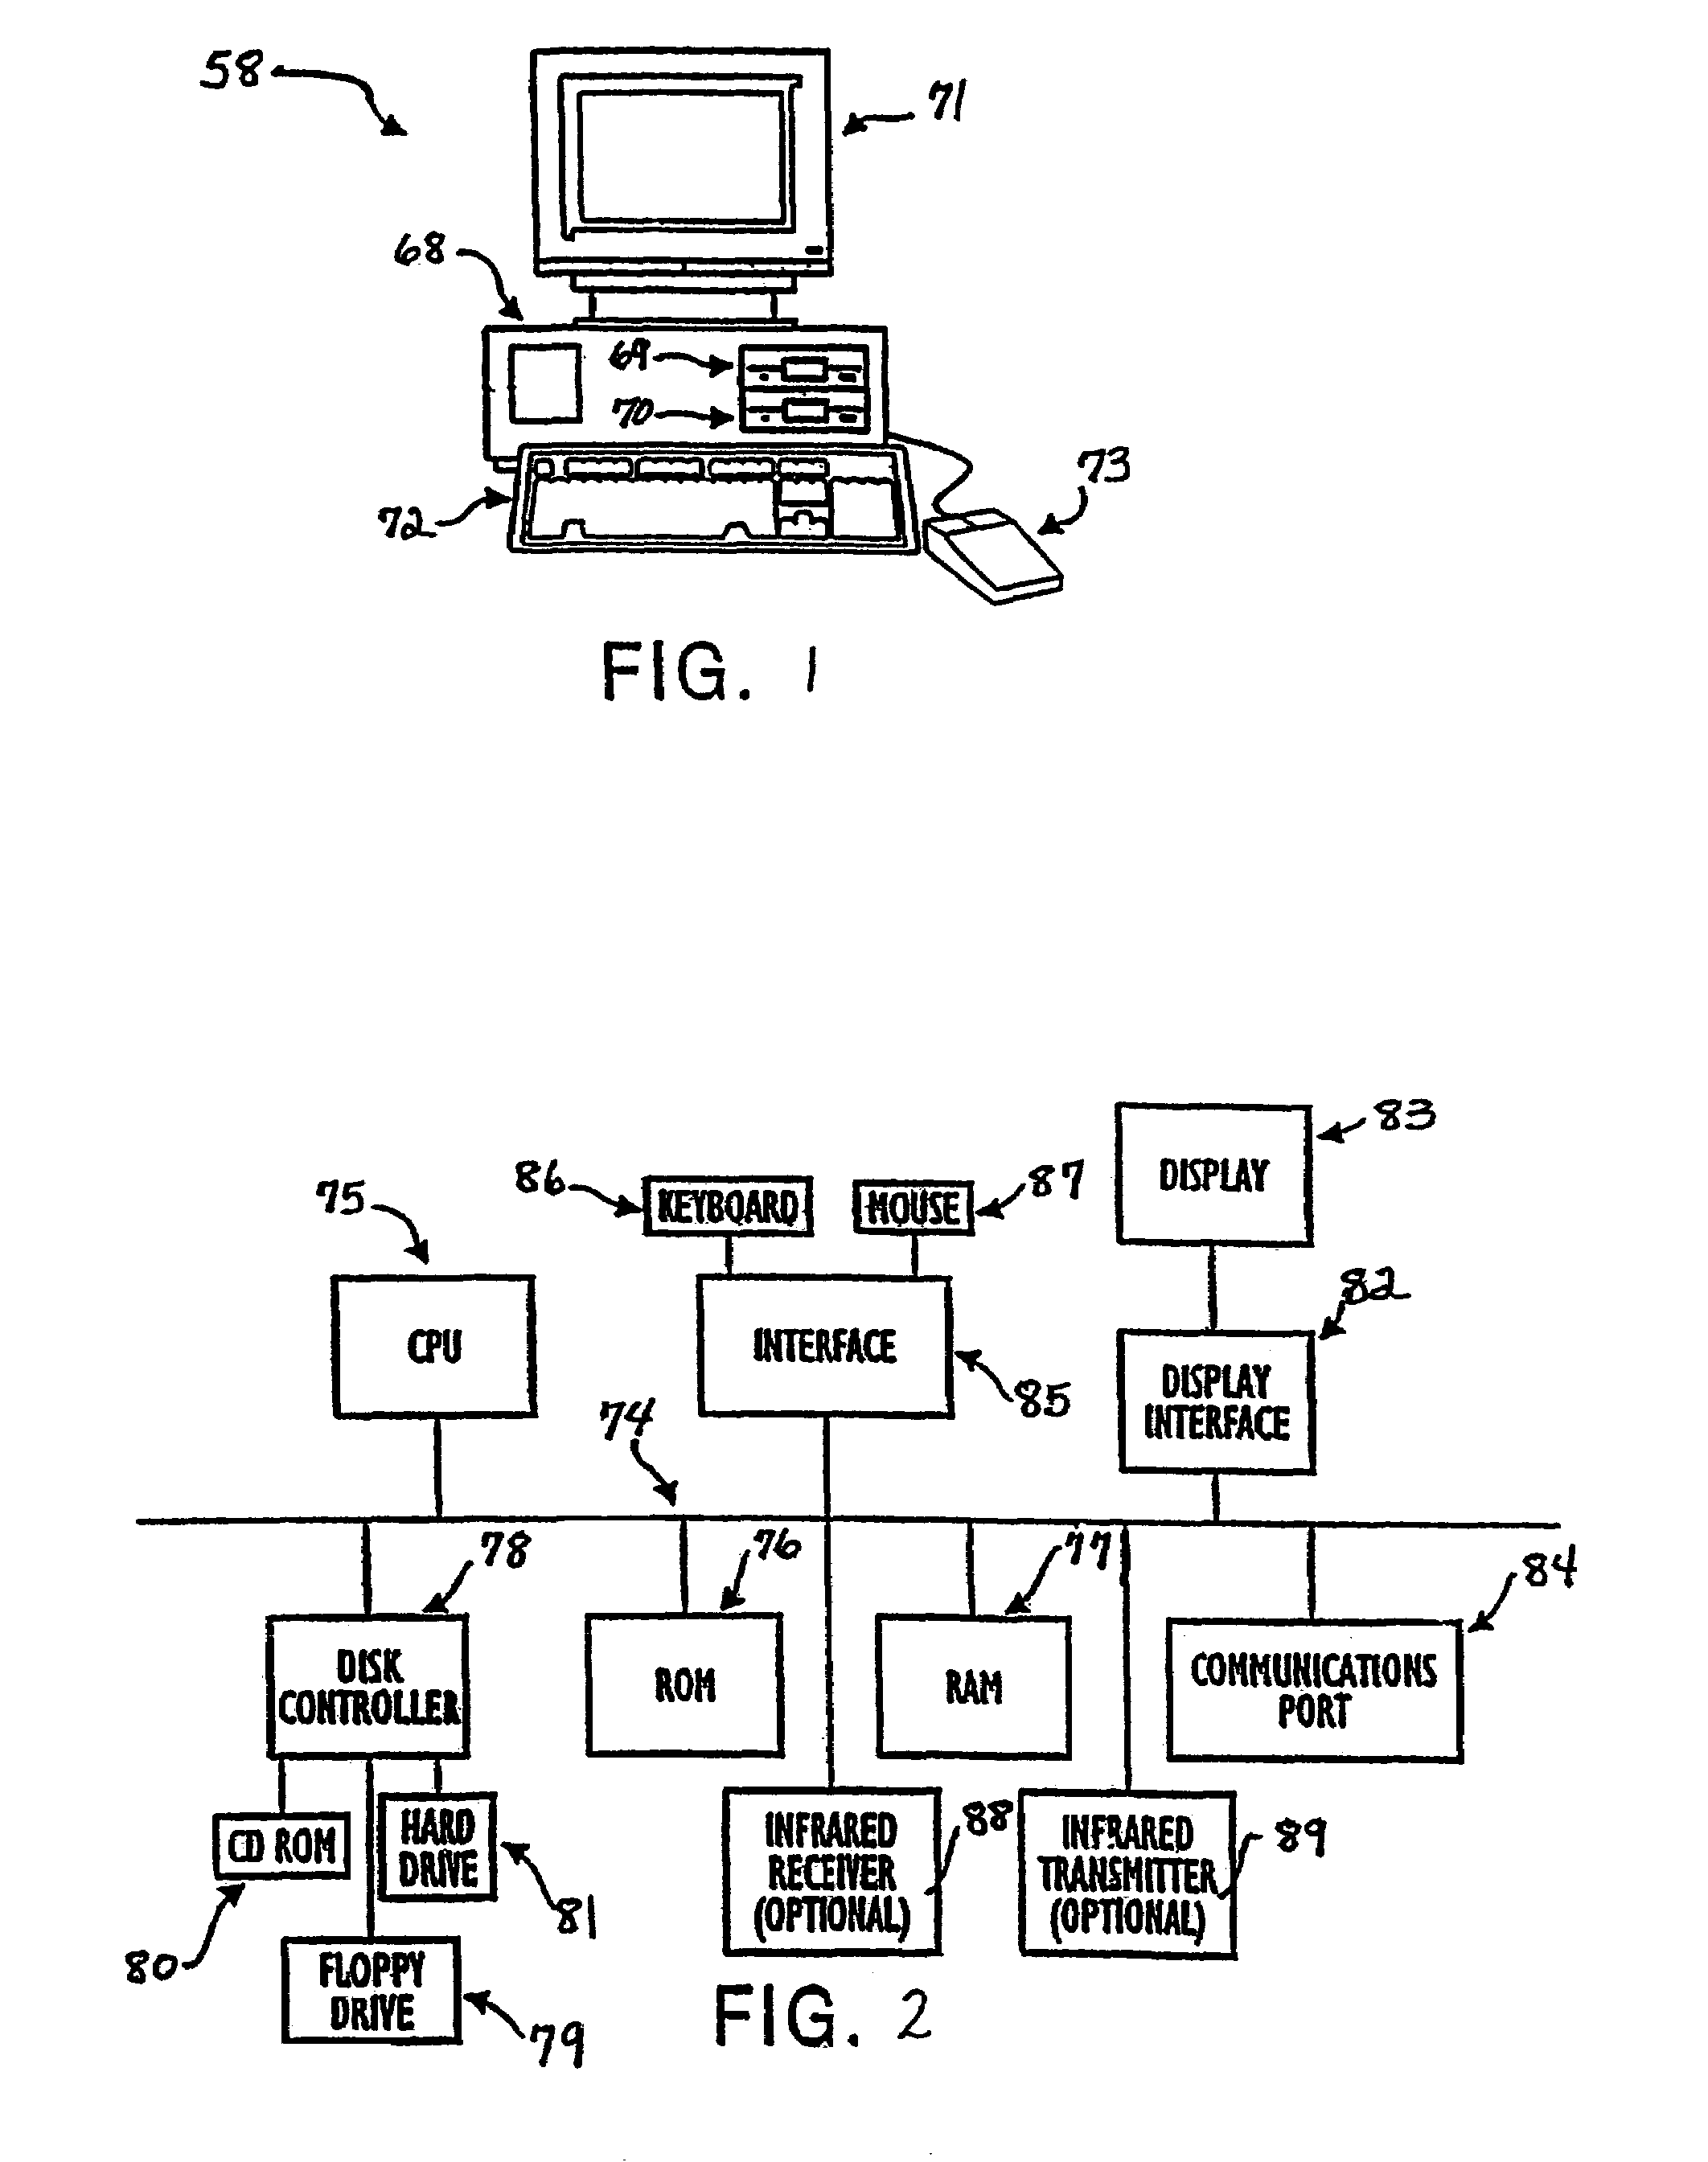 Dynamic authentication and initialization method